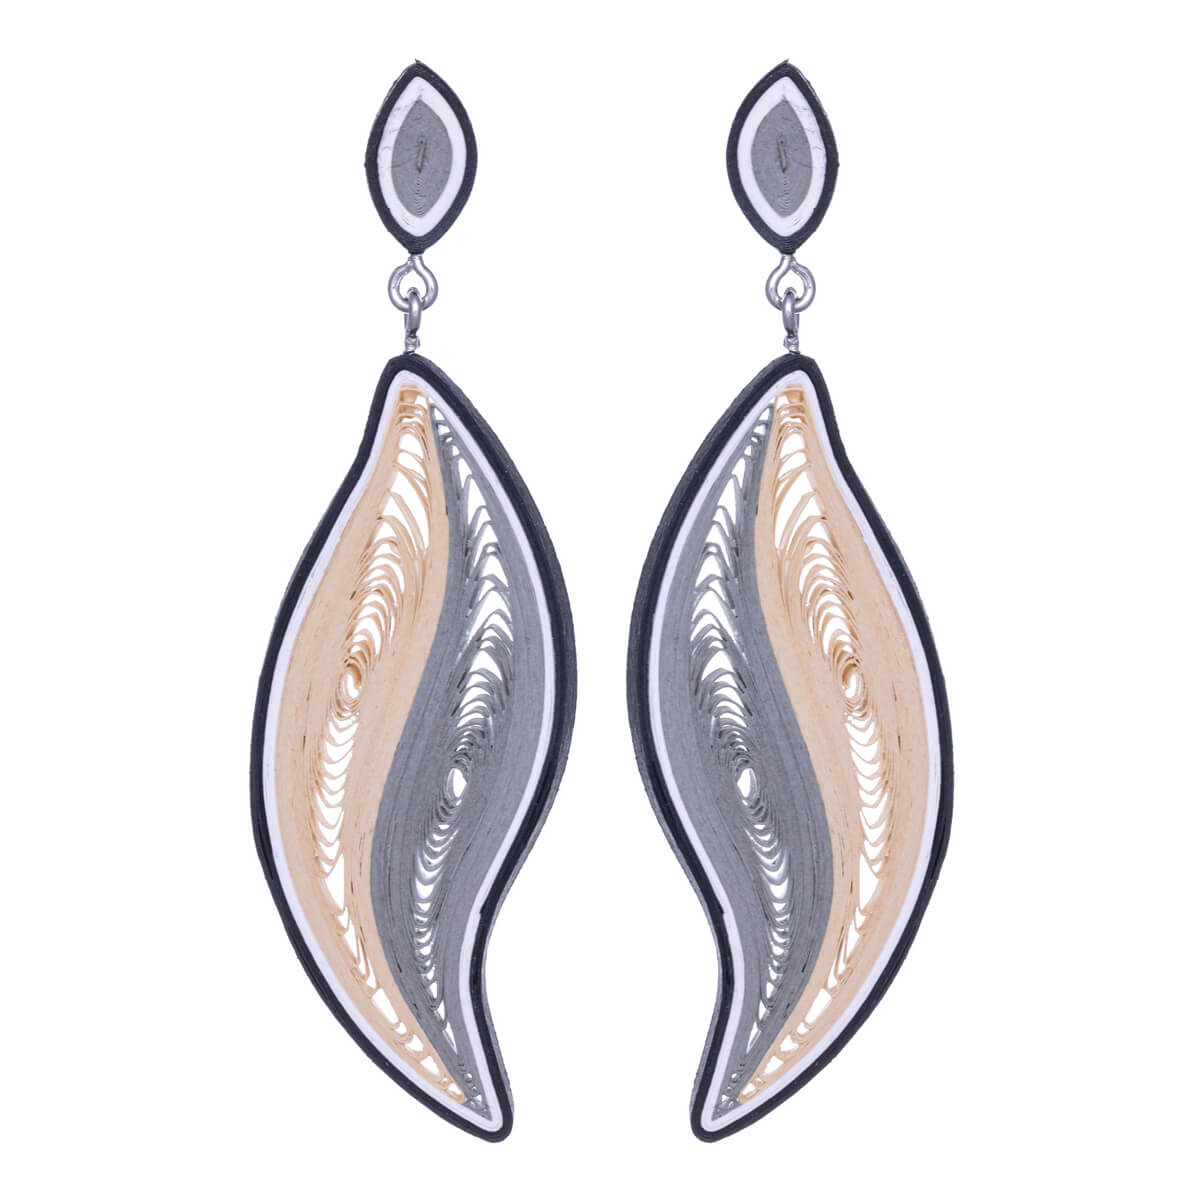 Drop earrings from the paper